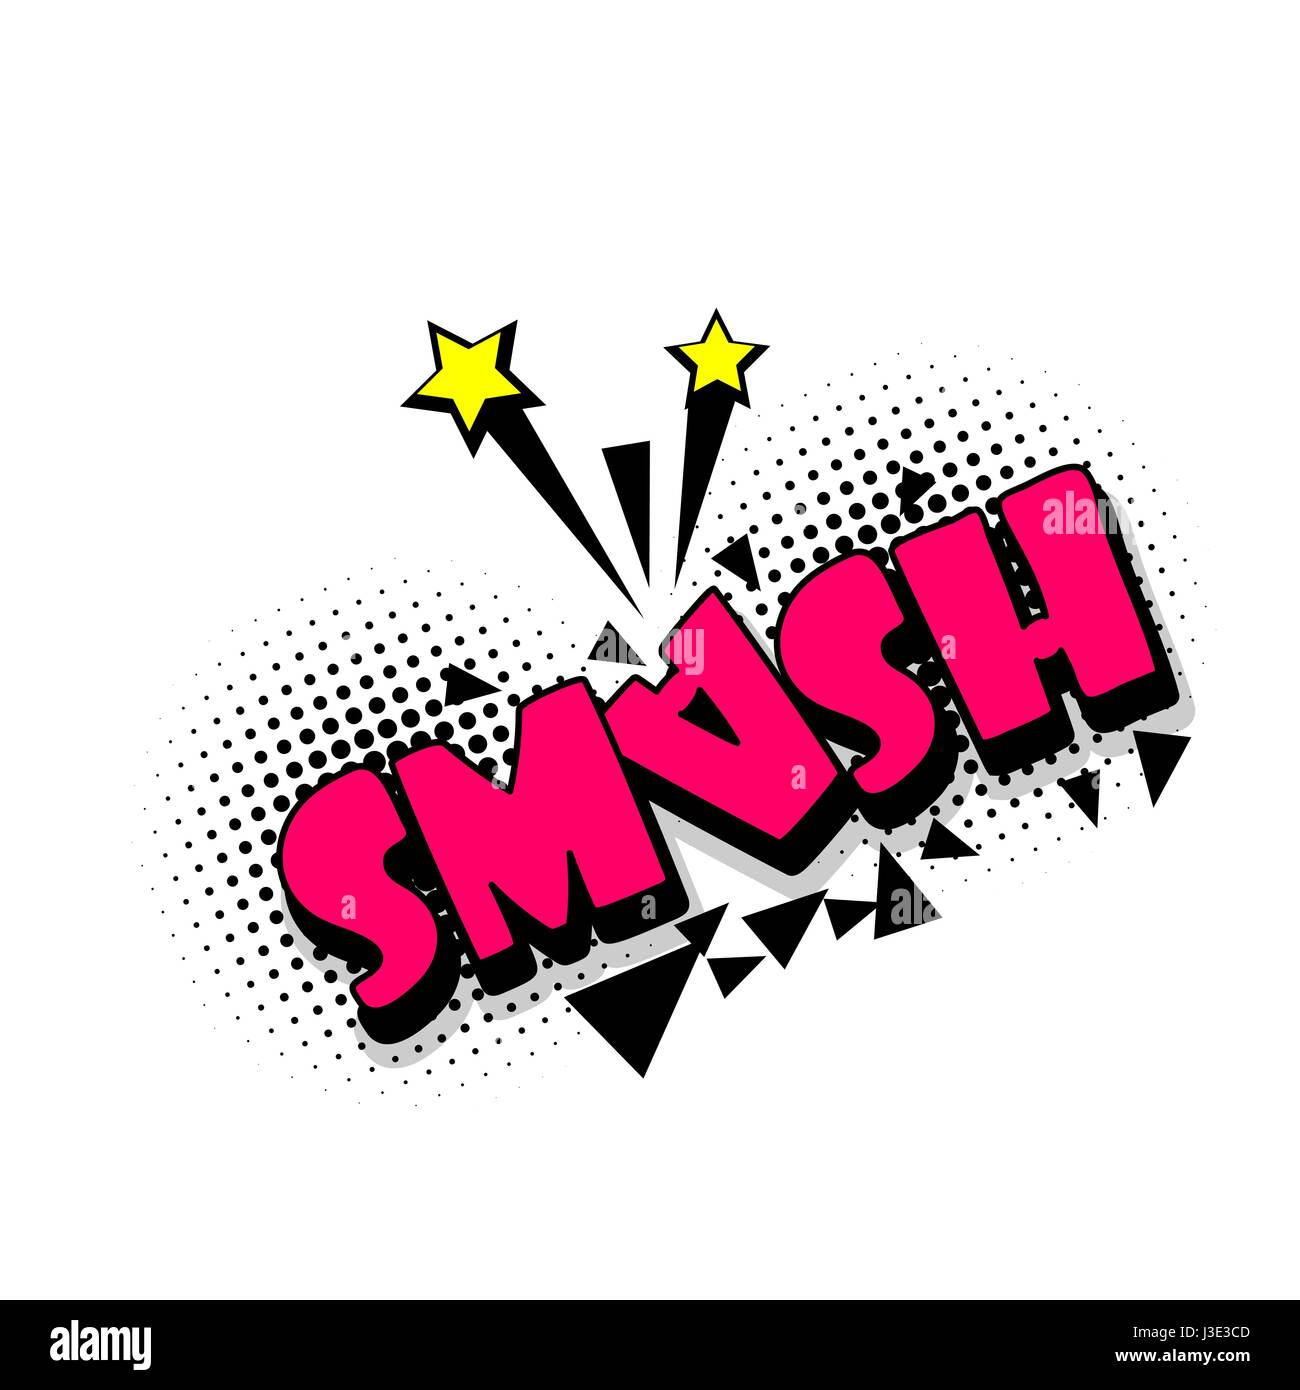 Smash Comic Book Style Expression Stock Illustration - Download